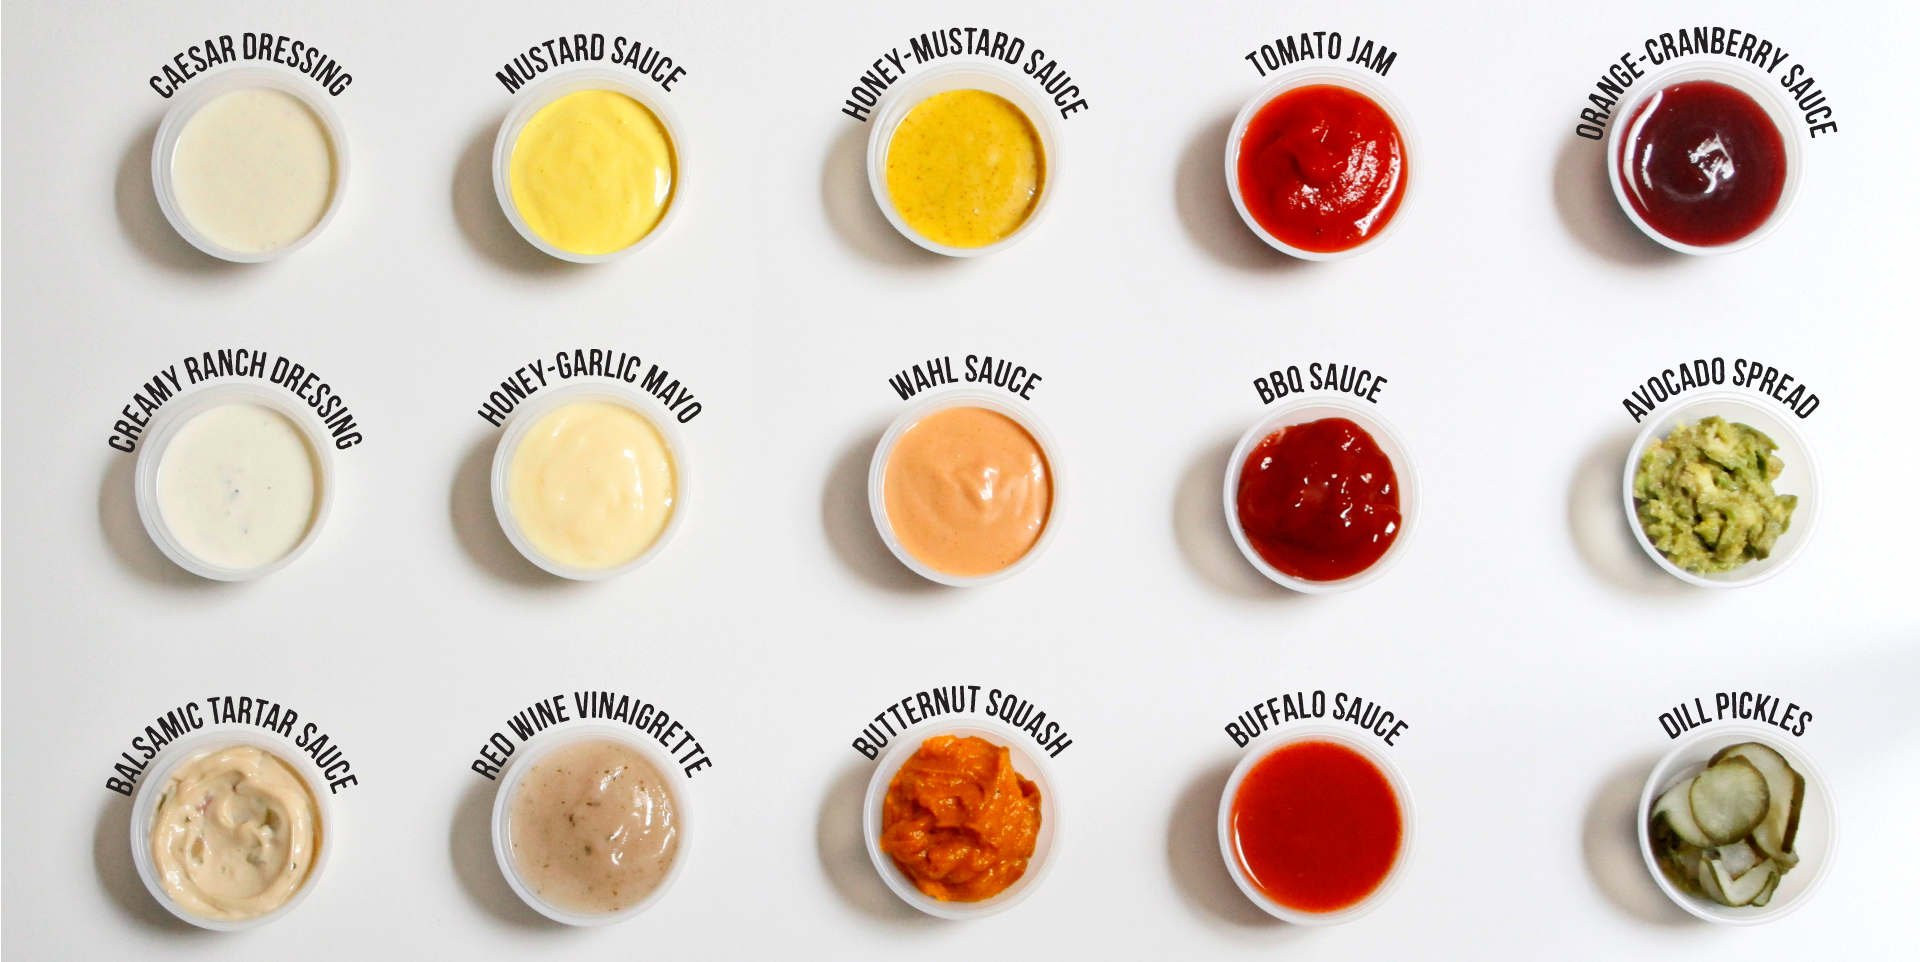 List Of Sauces And Condiments
 We serve 15 Varieties of Housemade Condiments and Sauces